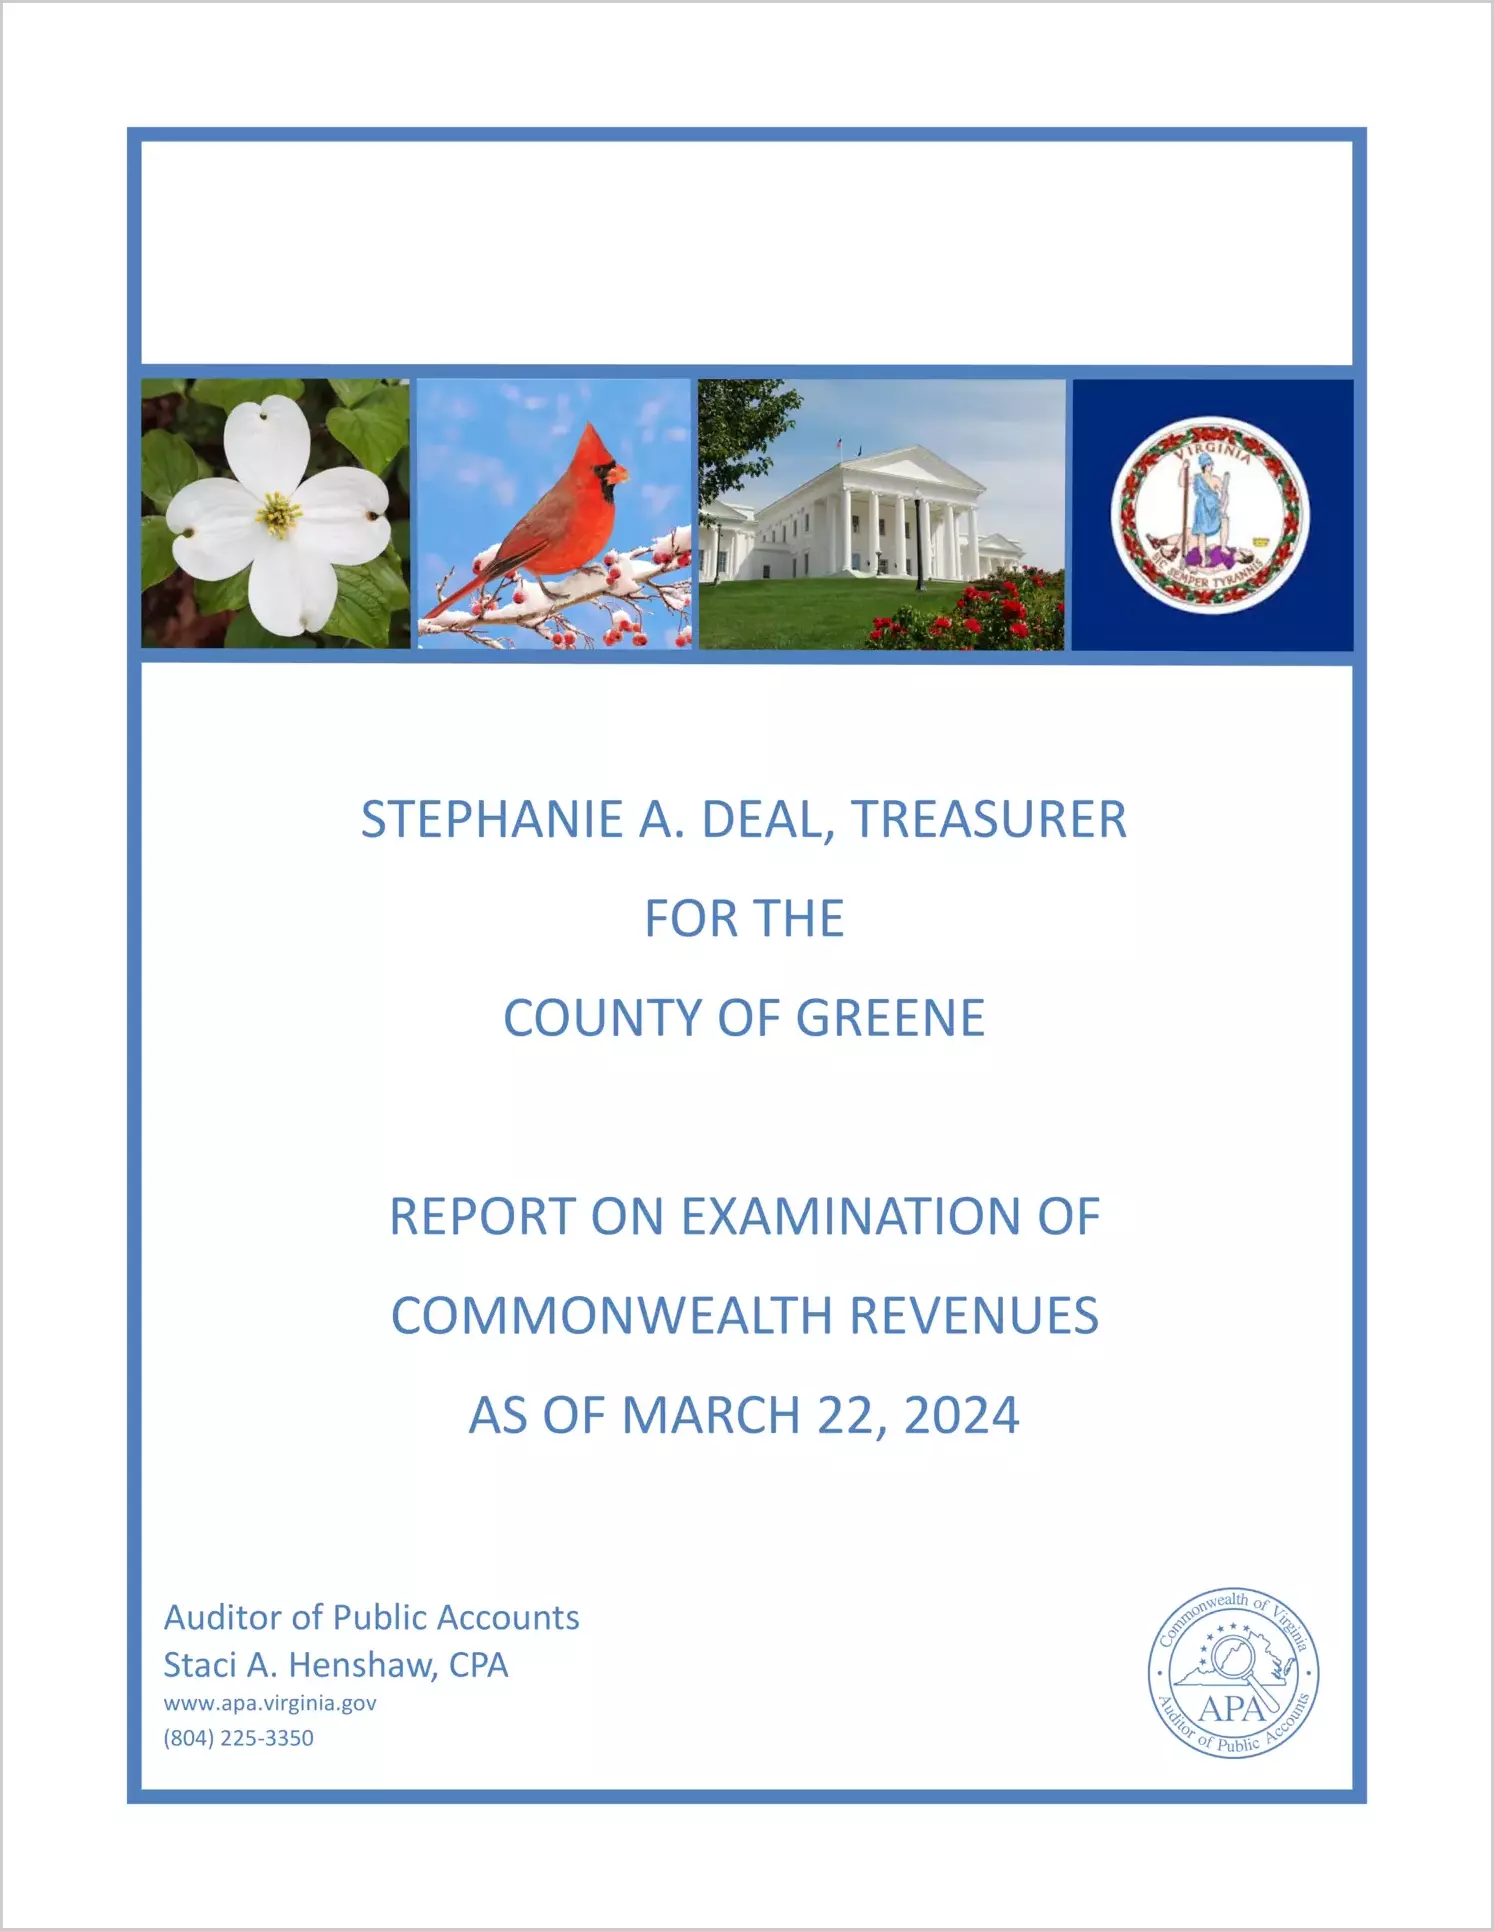 Report on Examination of Commonwealth Revenues (Treasurer Turnover) for the County of Greene as of March 22, 2024